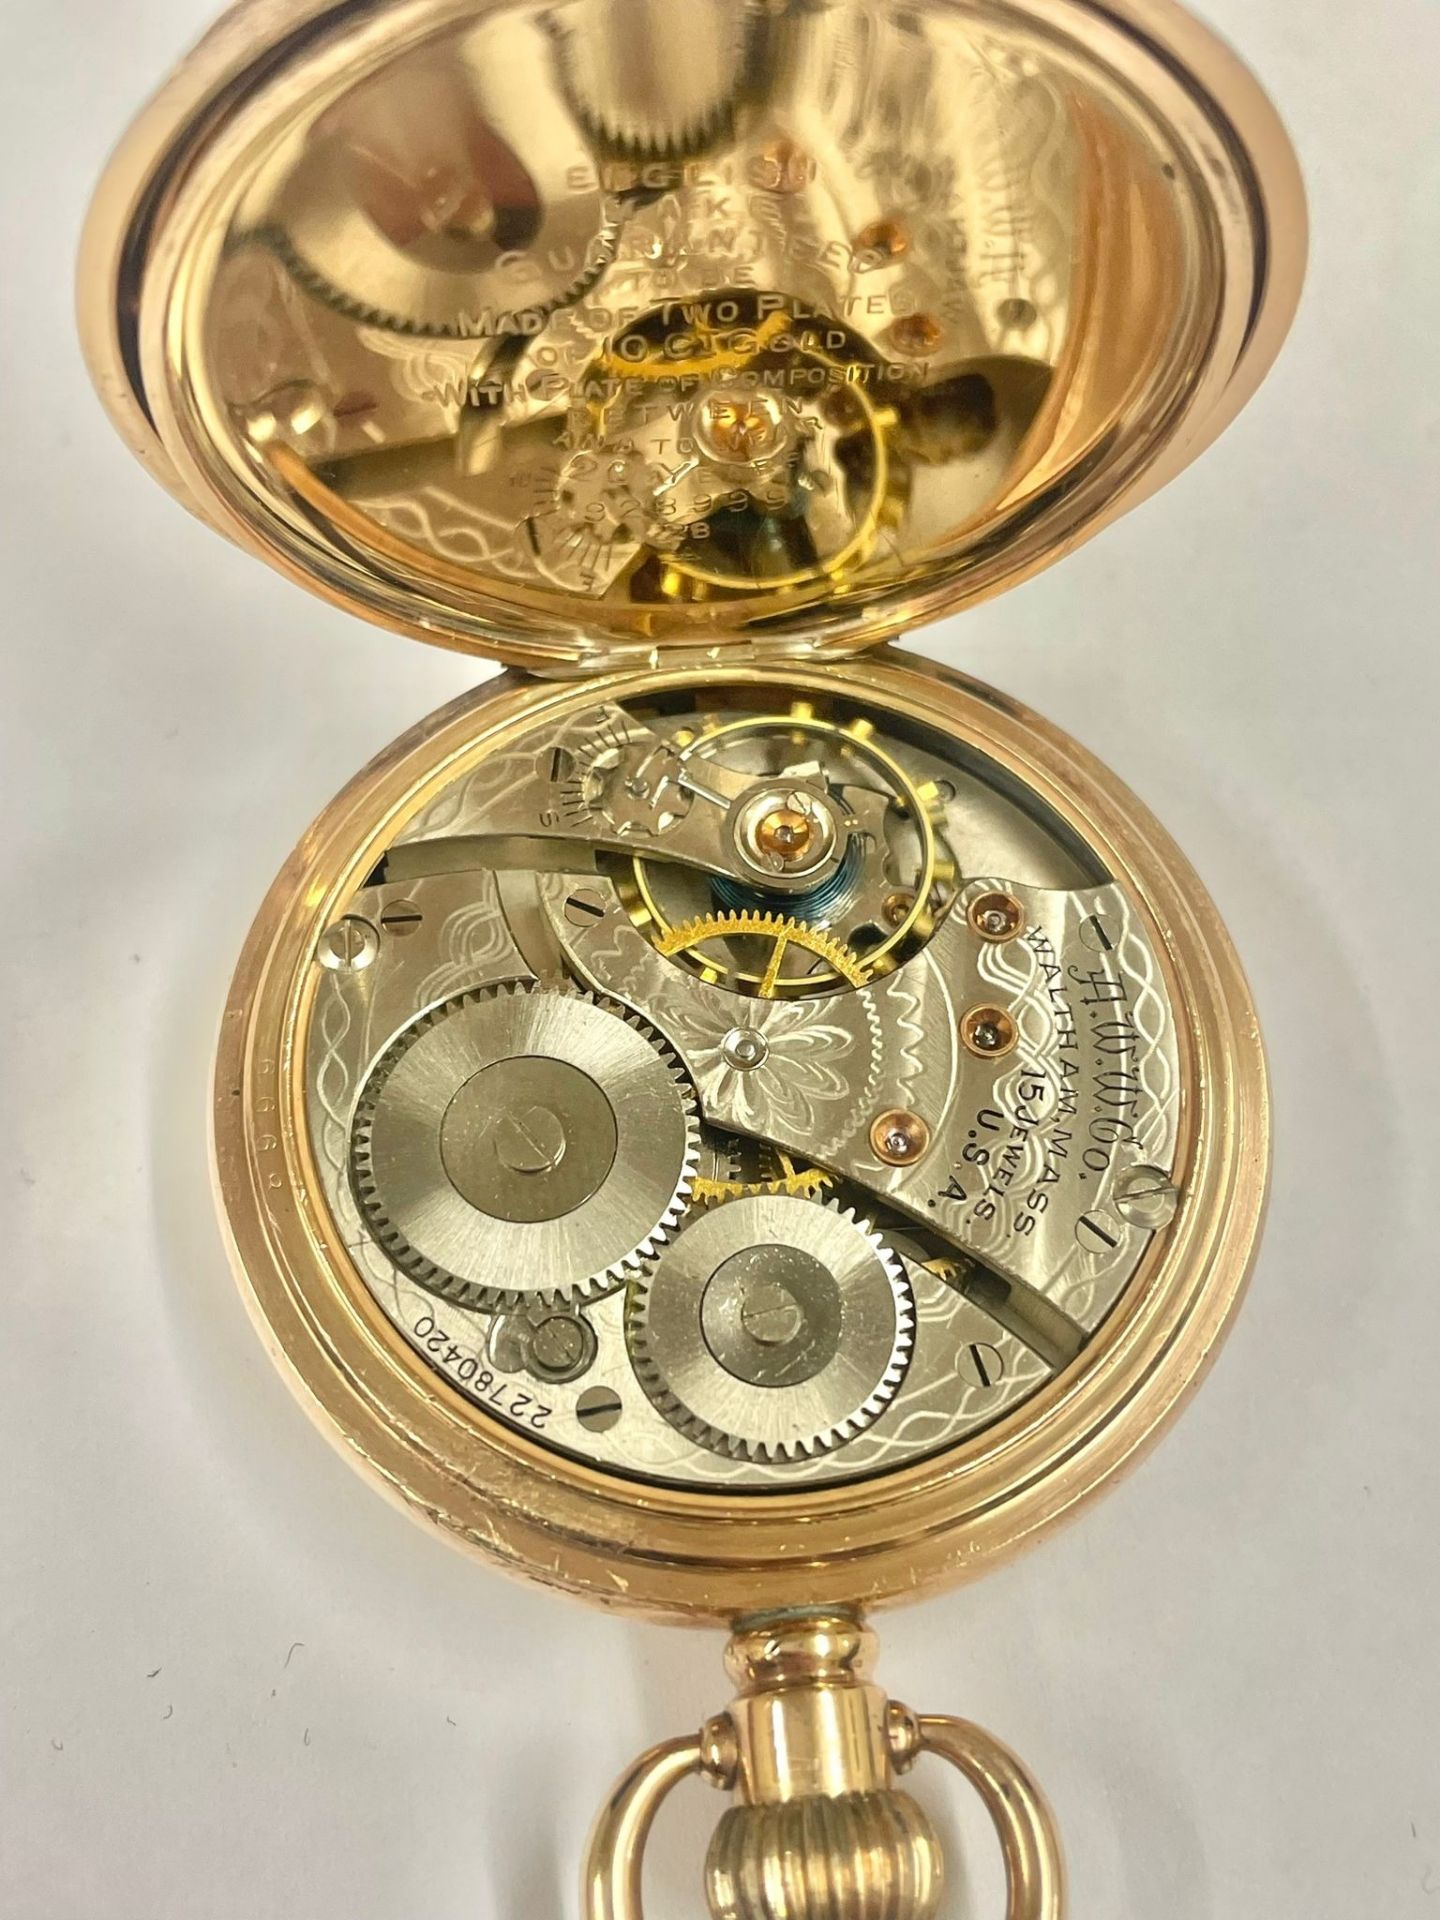 A Waltham full hunter pocket watch. In working order. - Image 3 of 3